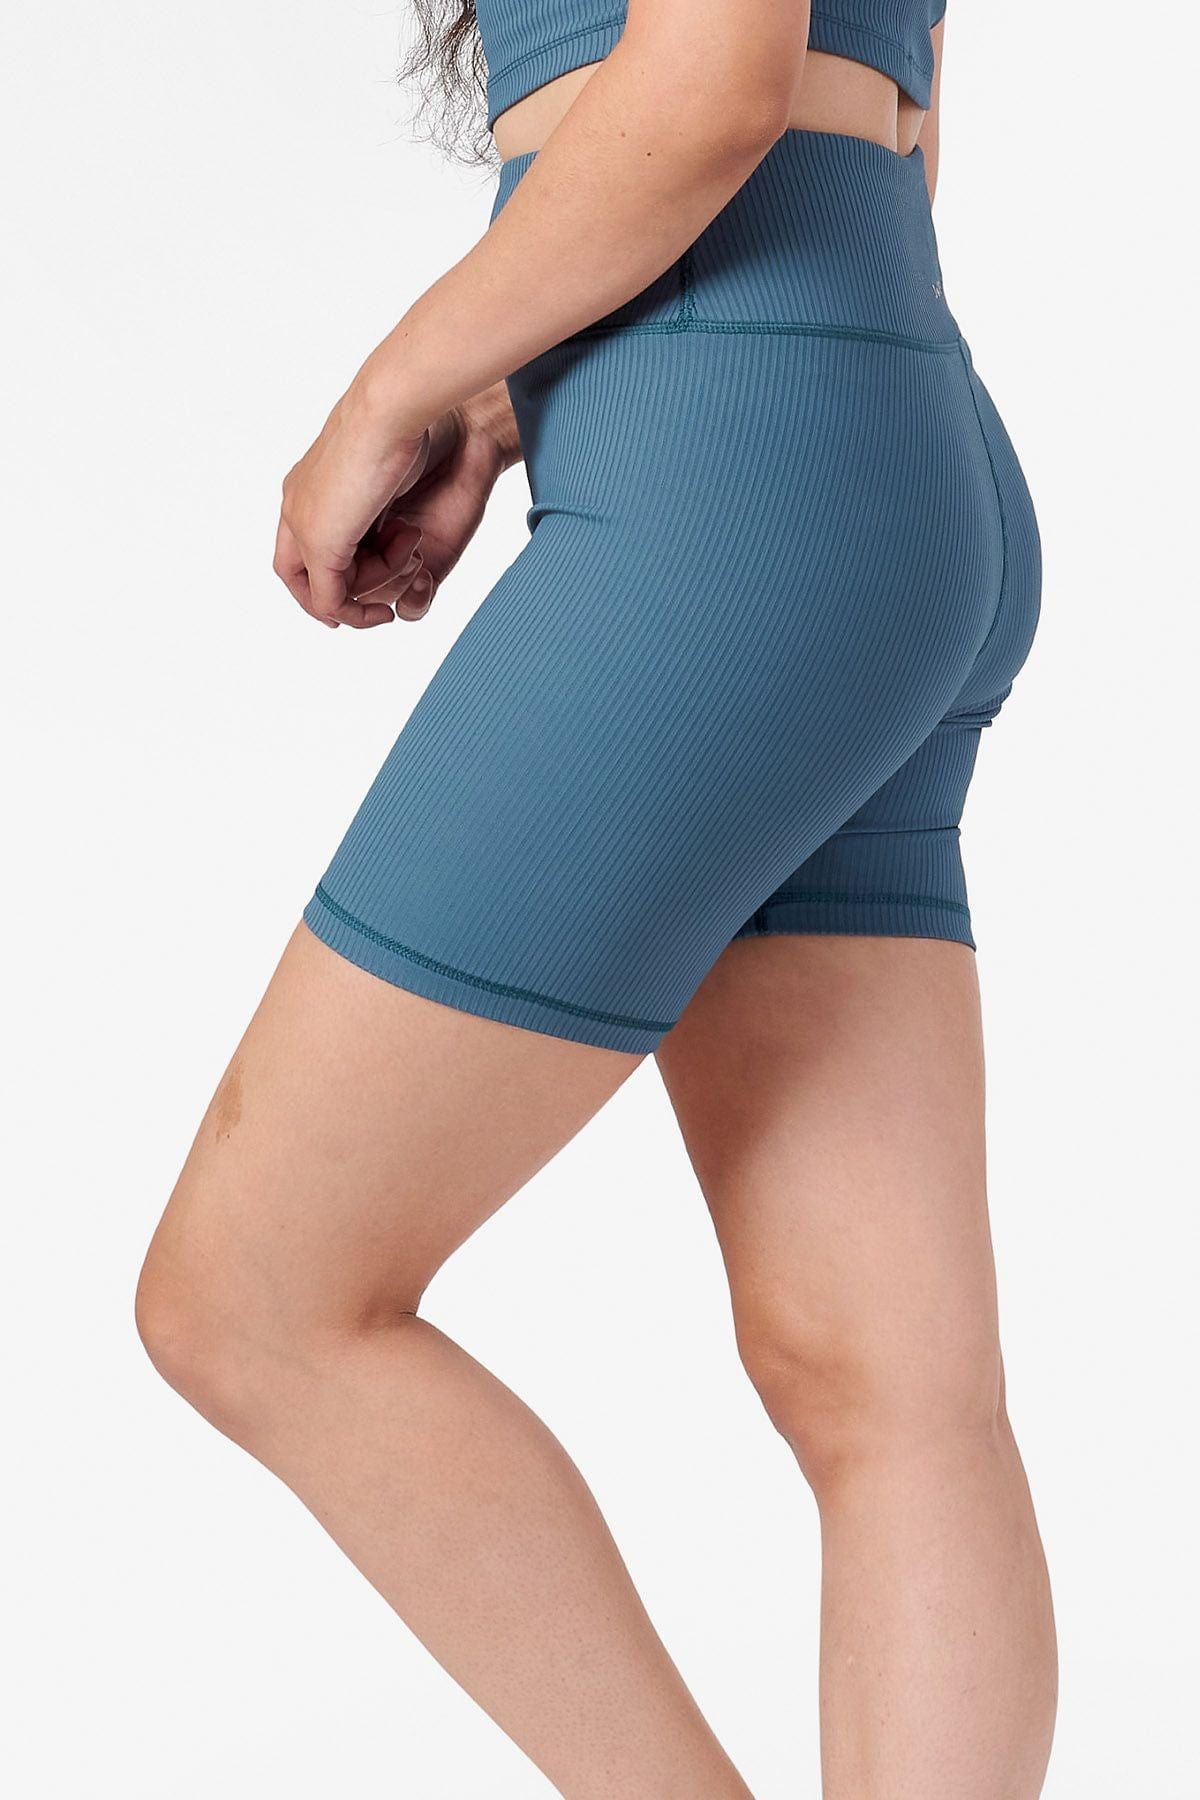 side view of a woman's legs wearing bike shorts in teal 